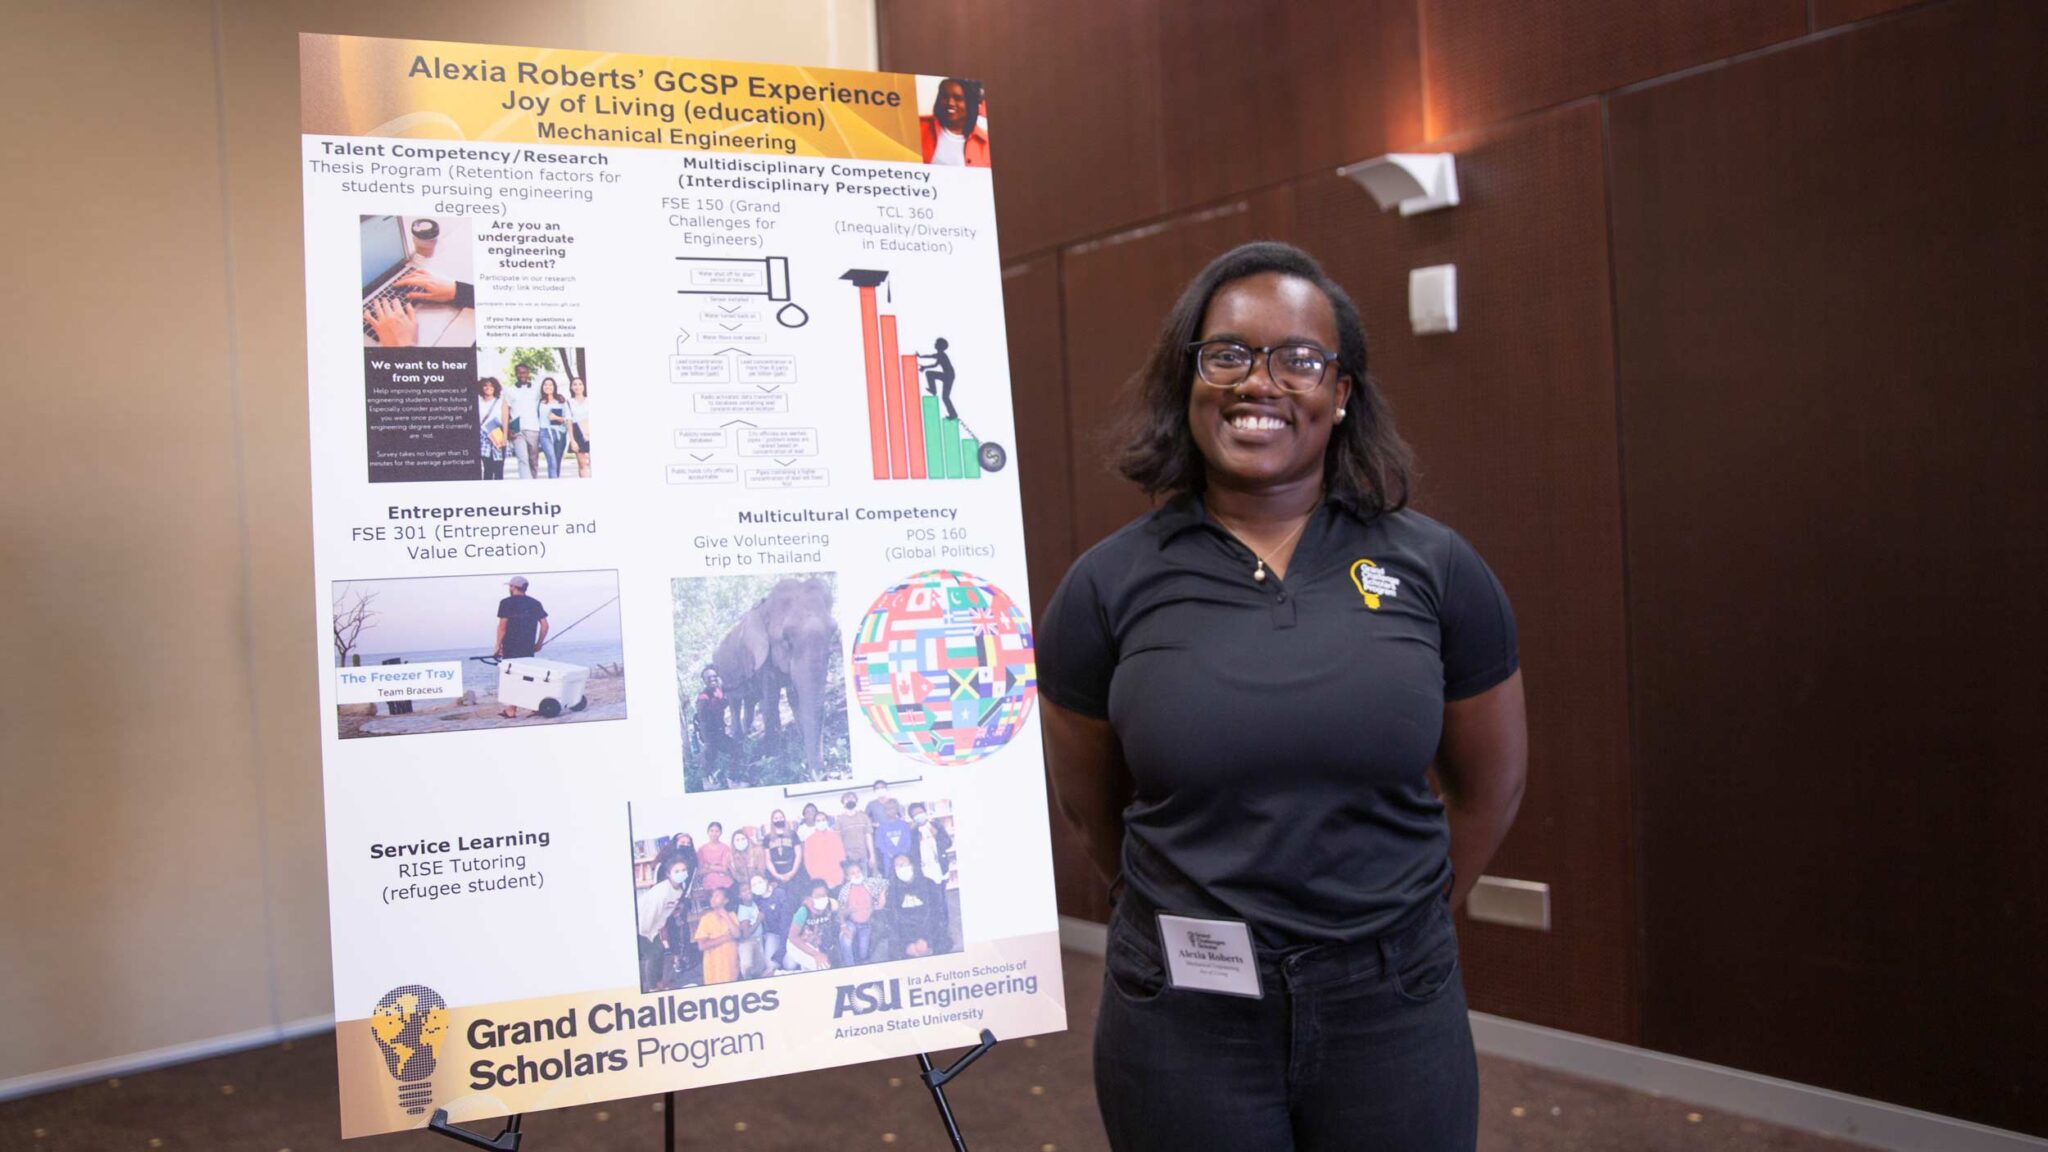 Alexia Roberts, an African-american scholar, poses happily by her poster displaying her research